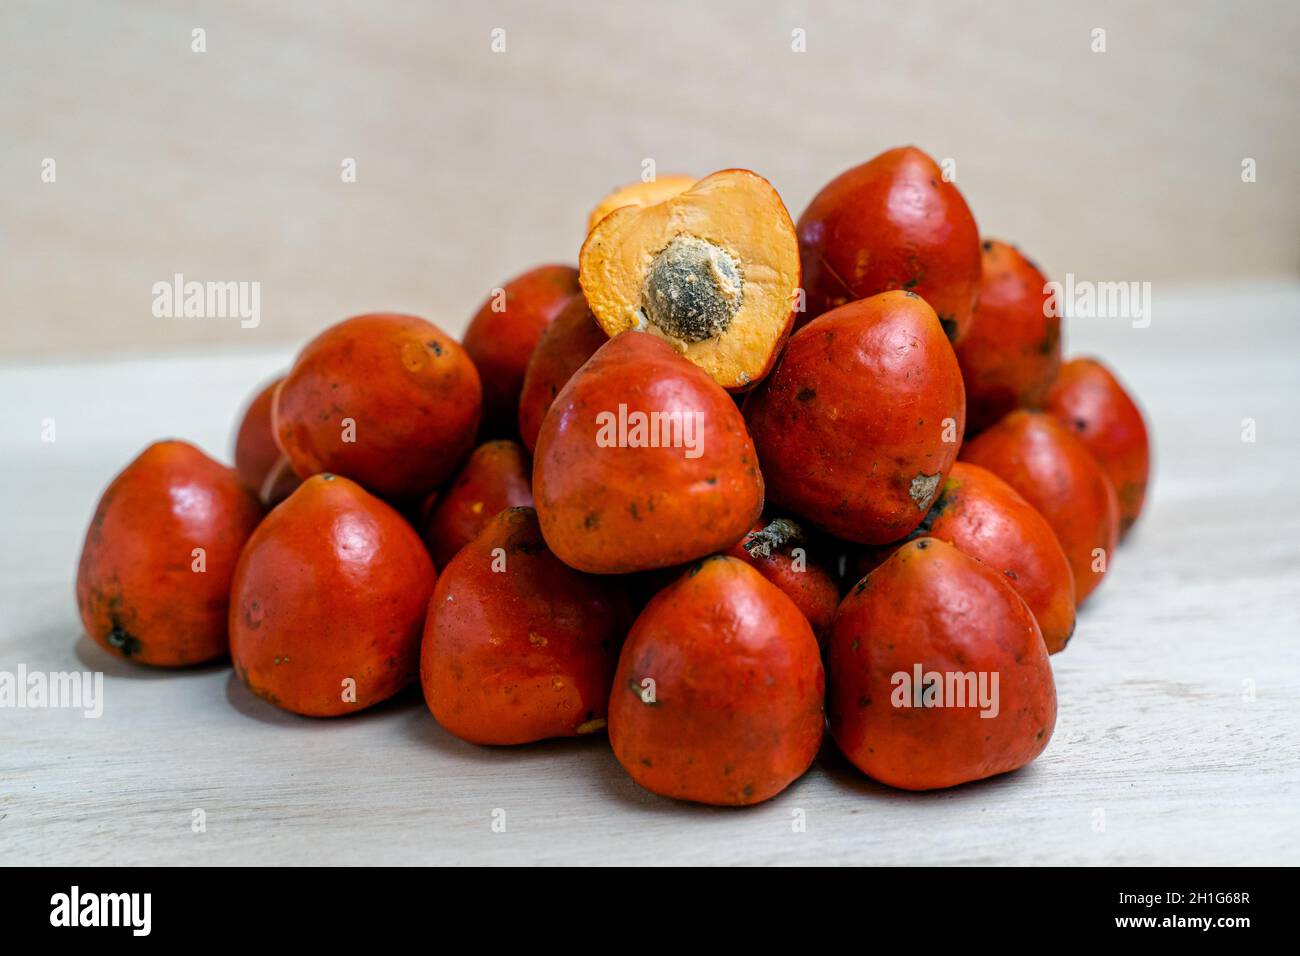 Heap of arranged peach palm fruits on the table Stock Photo